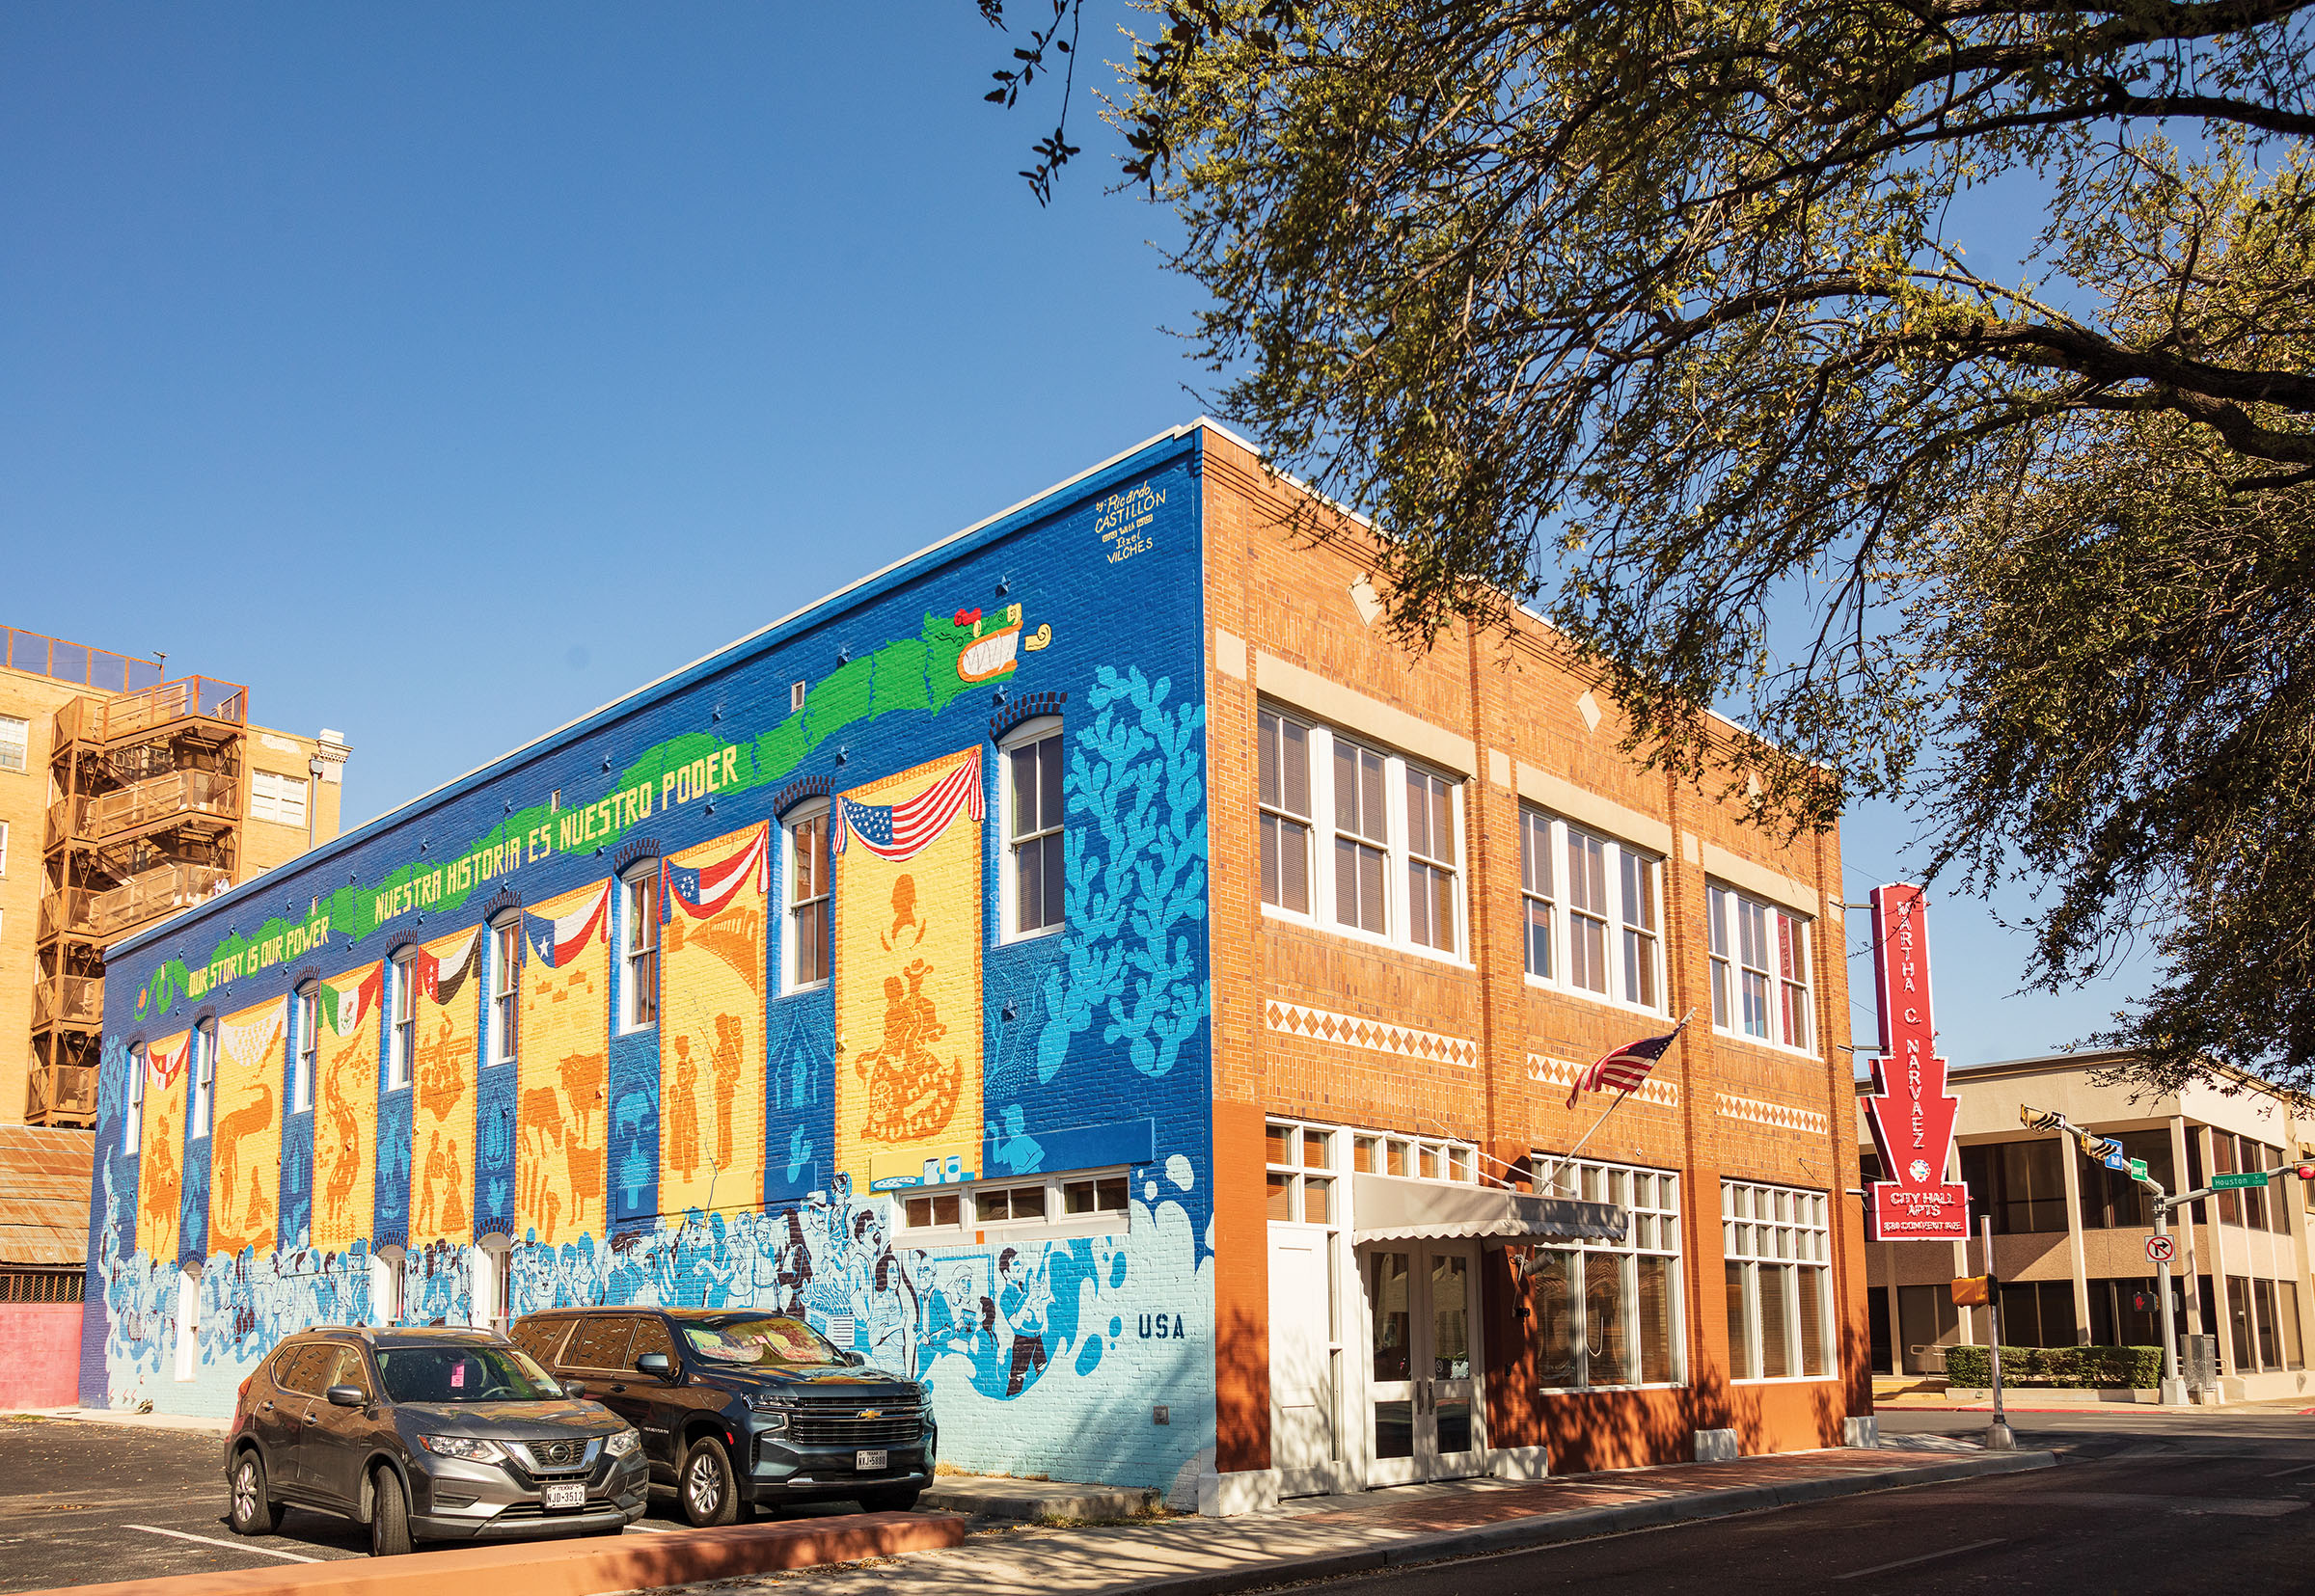 The exterior of a brick building painted with a bright blue and yellow mural